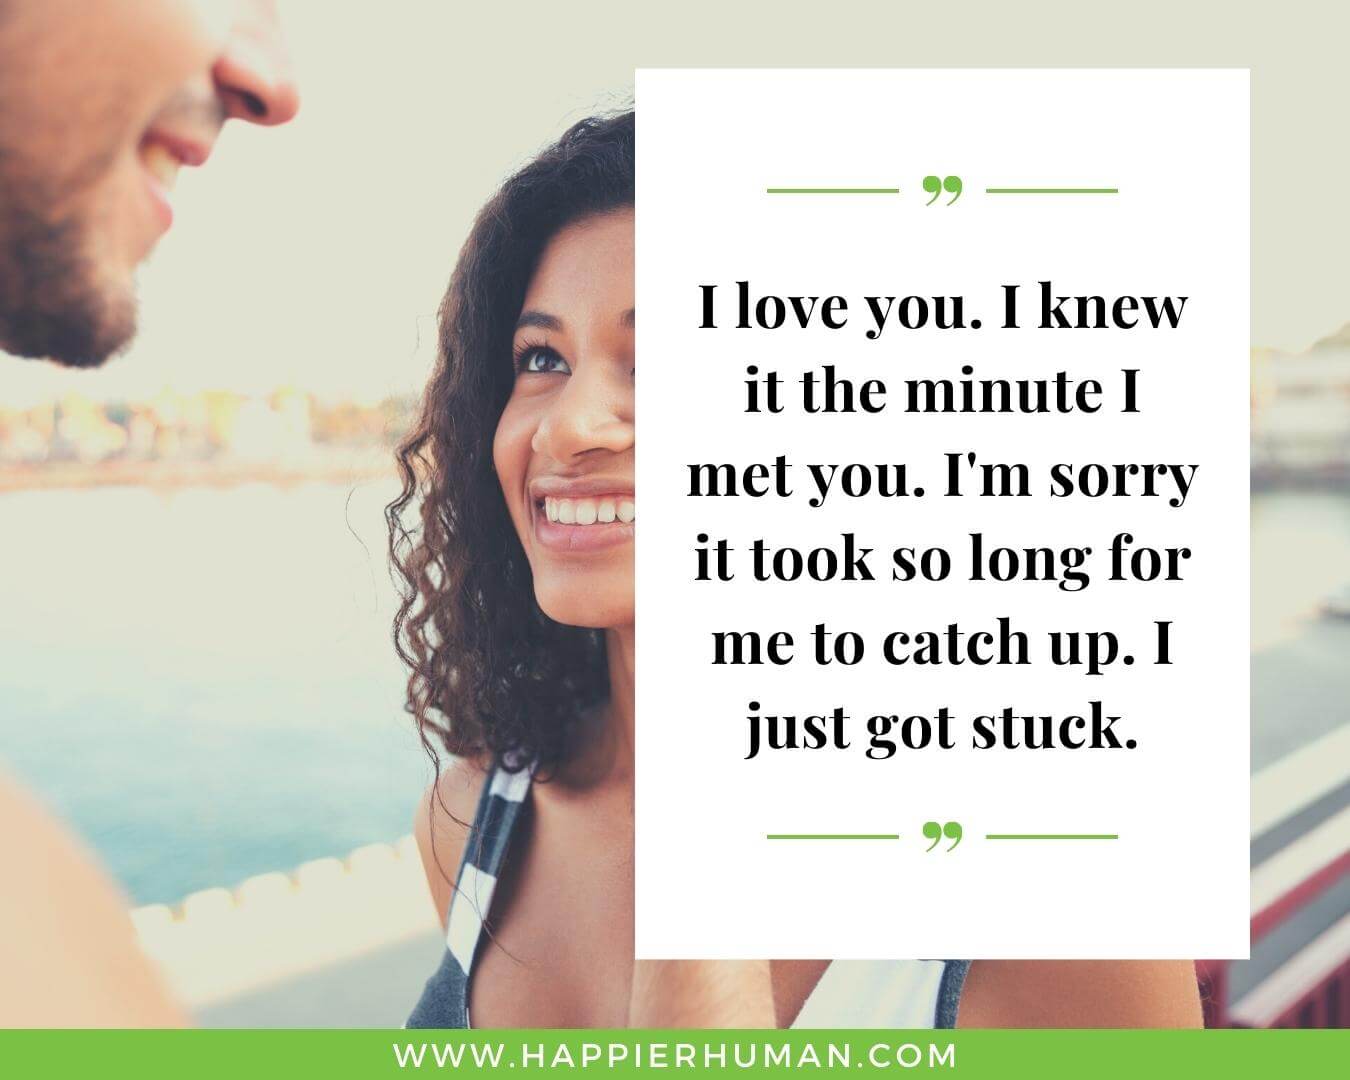 Unconditional Love Quotes for Her - “I love you. I knew it the minute I met you. I'm sorry it took so long for me to catch up. I just got stuck.”